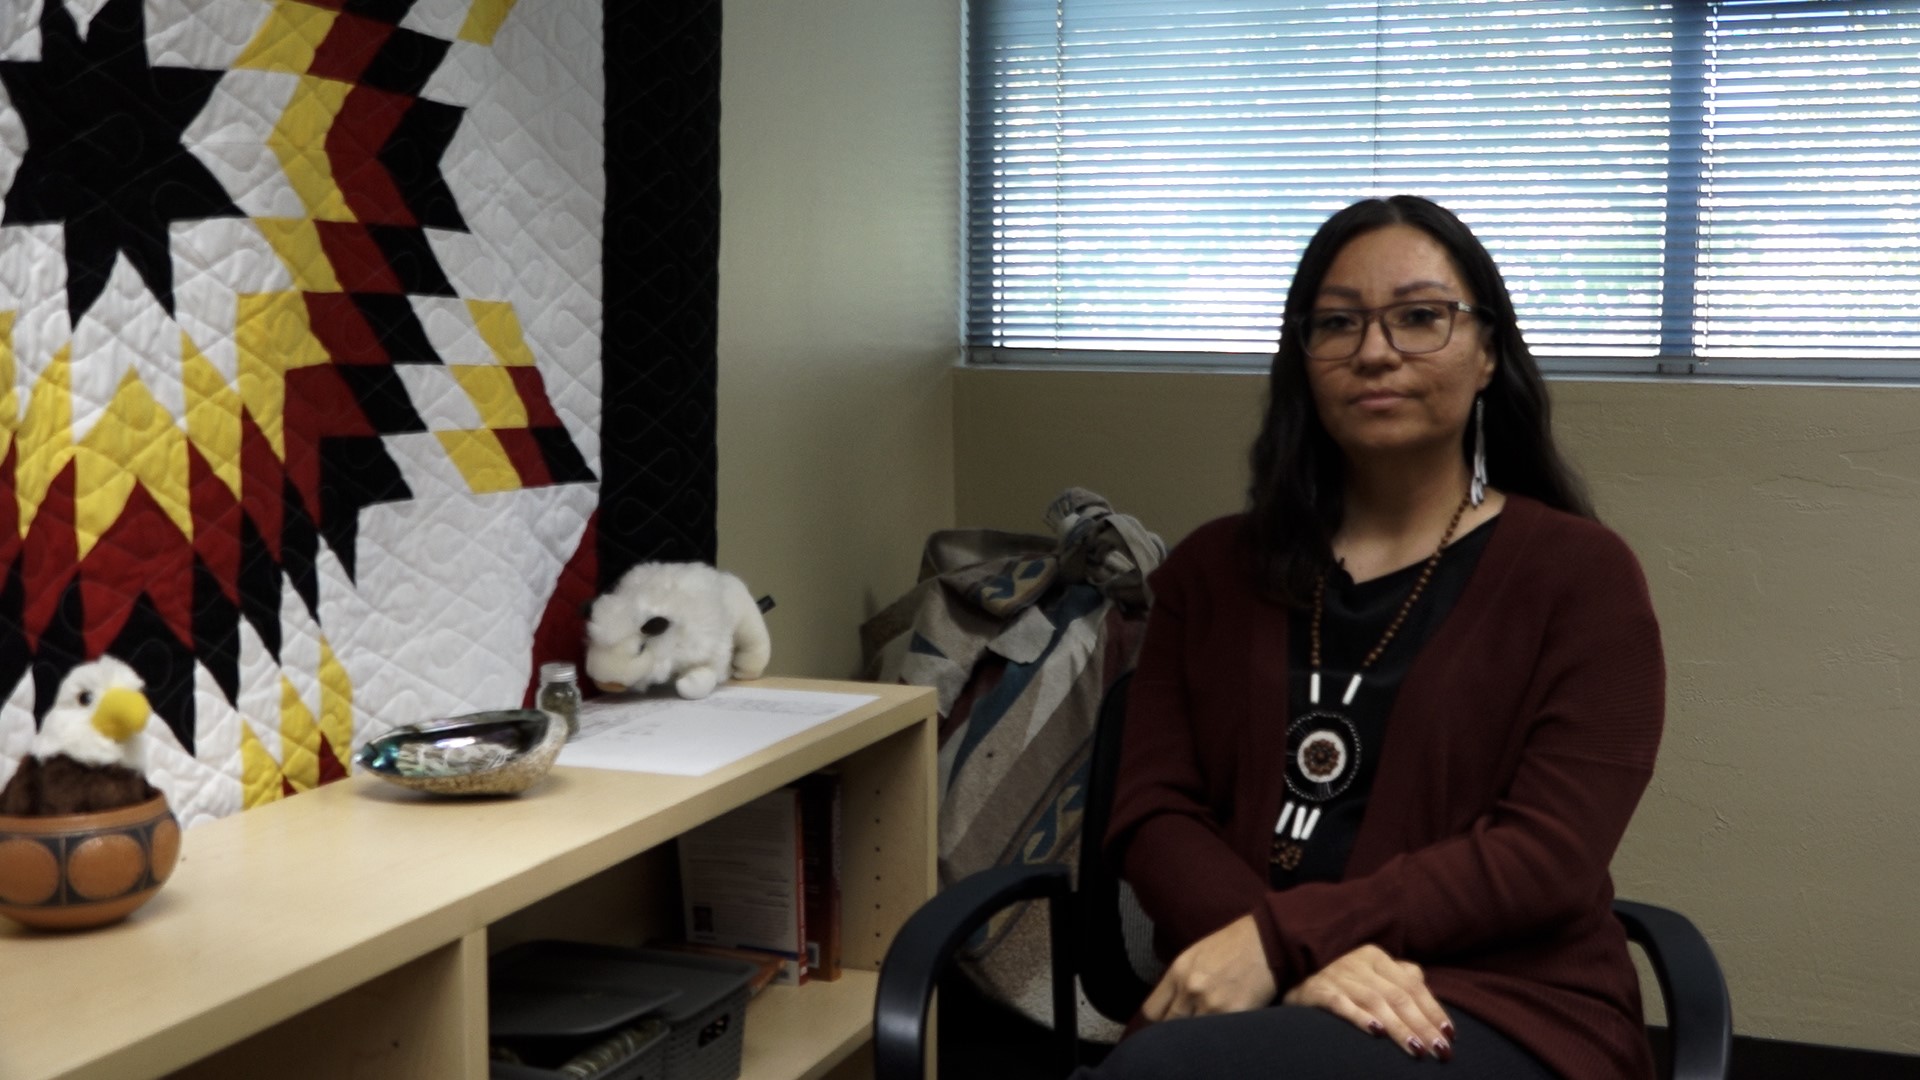 Leticia Aguilar, Founder of Native Sister Circle, spoke briefly with ABC10 about how history still plays a role in Indian Country today.